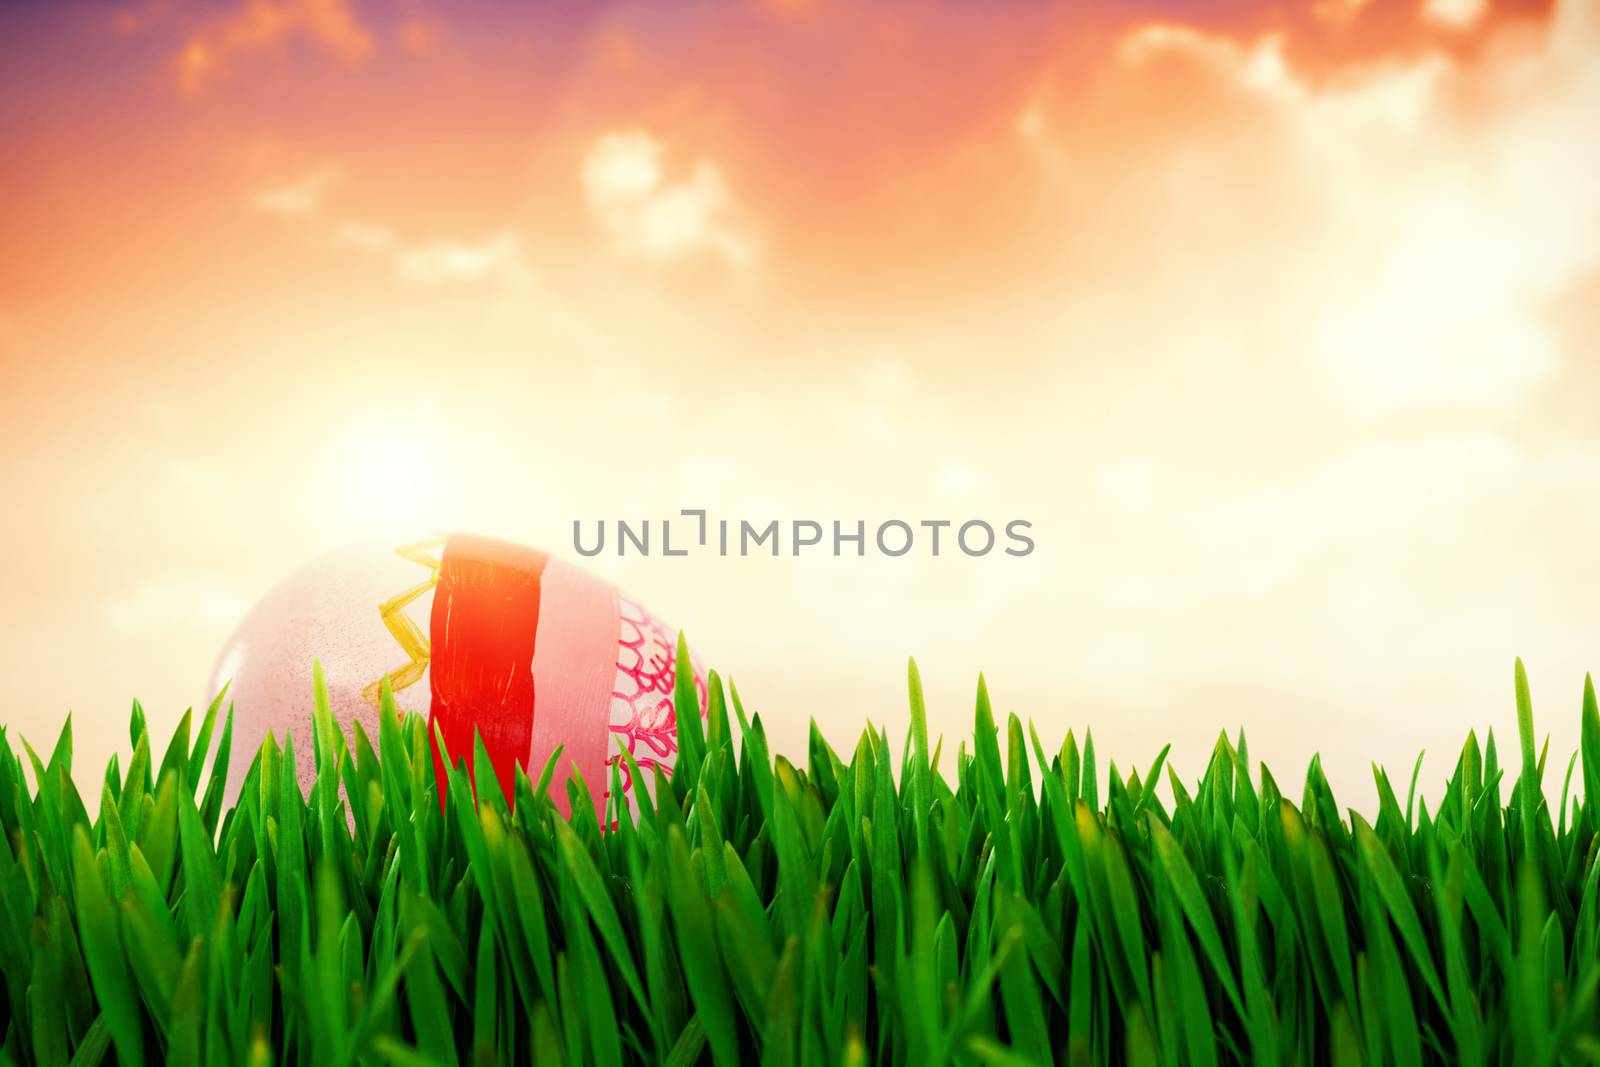 Grass growing outdoors against painted easter eggs on white background